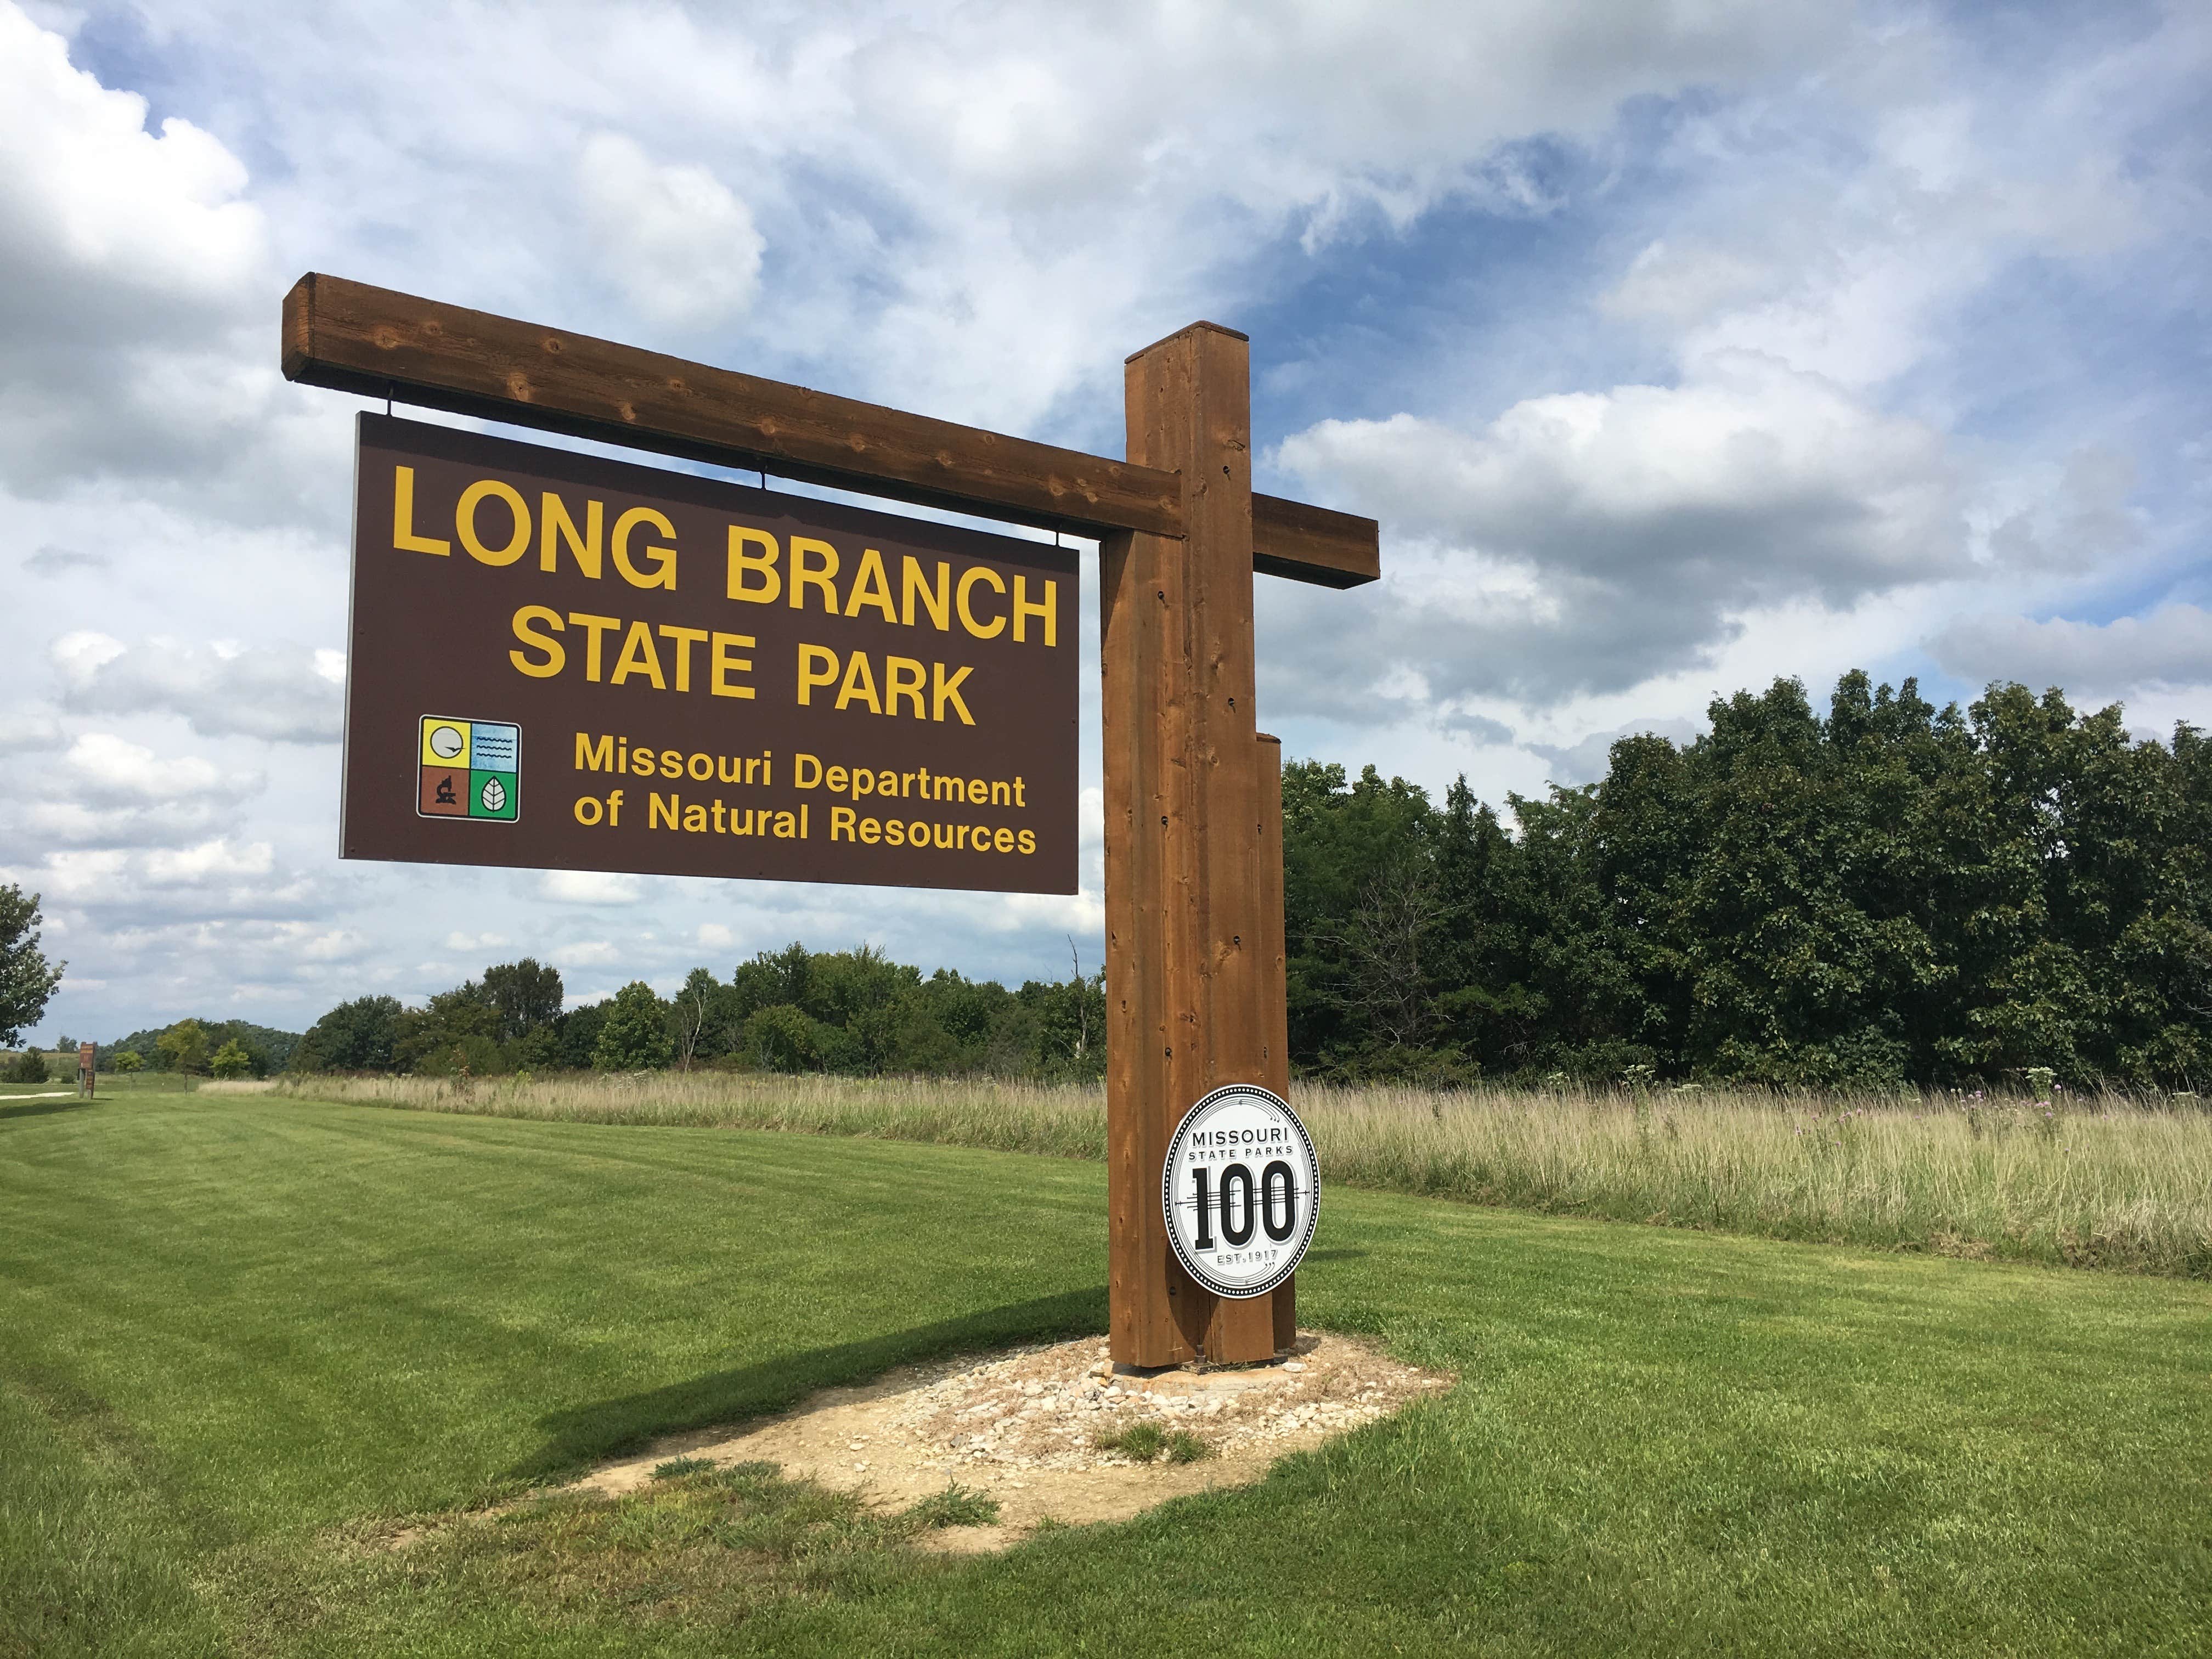 Long Branch State Park